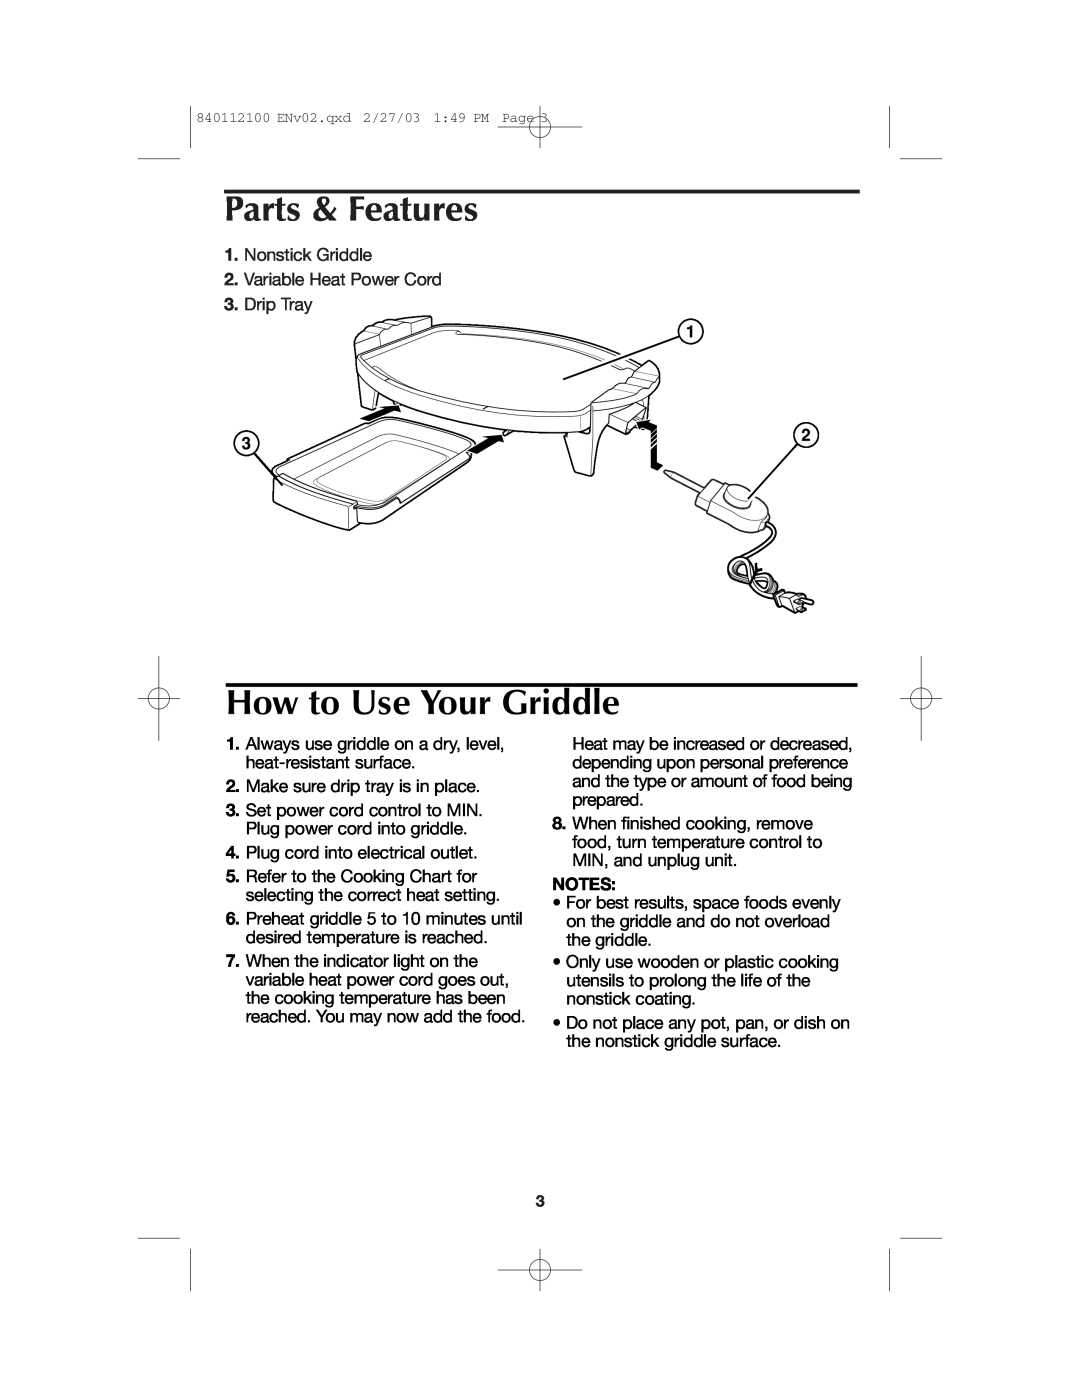 Proctor-Silex 840112100 manual Parts & Features, How to Use Your Griddle 